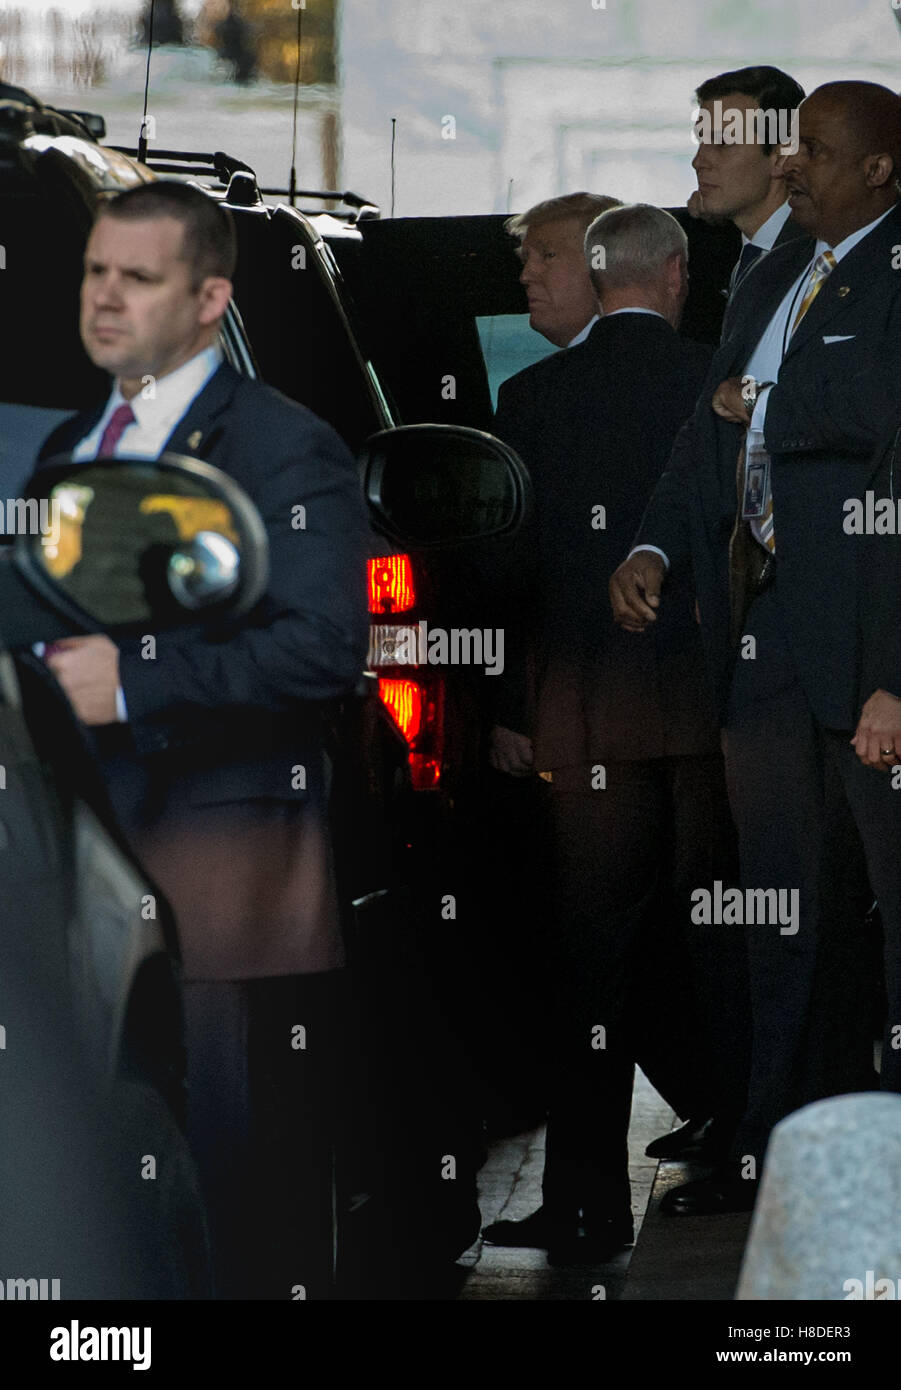 Washington Dc, DC, USA. 10th Nov, 2016. U.S. President elect Donald Trump leaves the US Capitol in Washington DC after meetings with House Speaker Paul Ryan (R-Wis), and Senate Majority Leader Mitch McConnell. Credit:  Ken Cedeno/ZUMA Wire/Alamy Live News Stock Photo